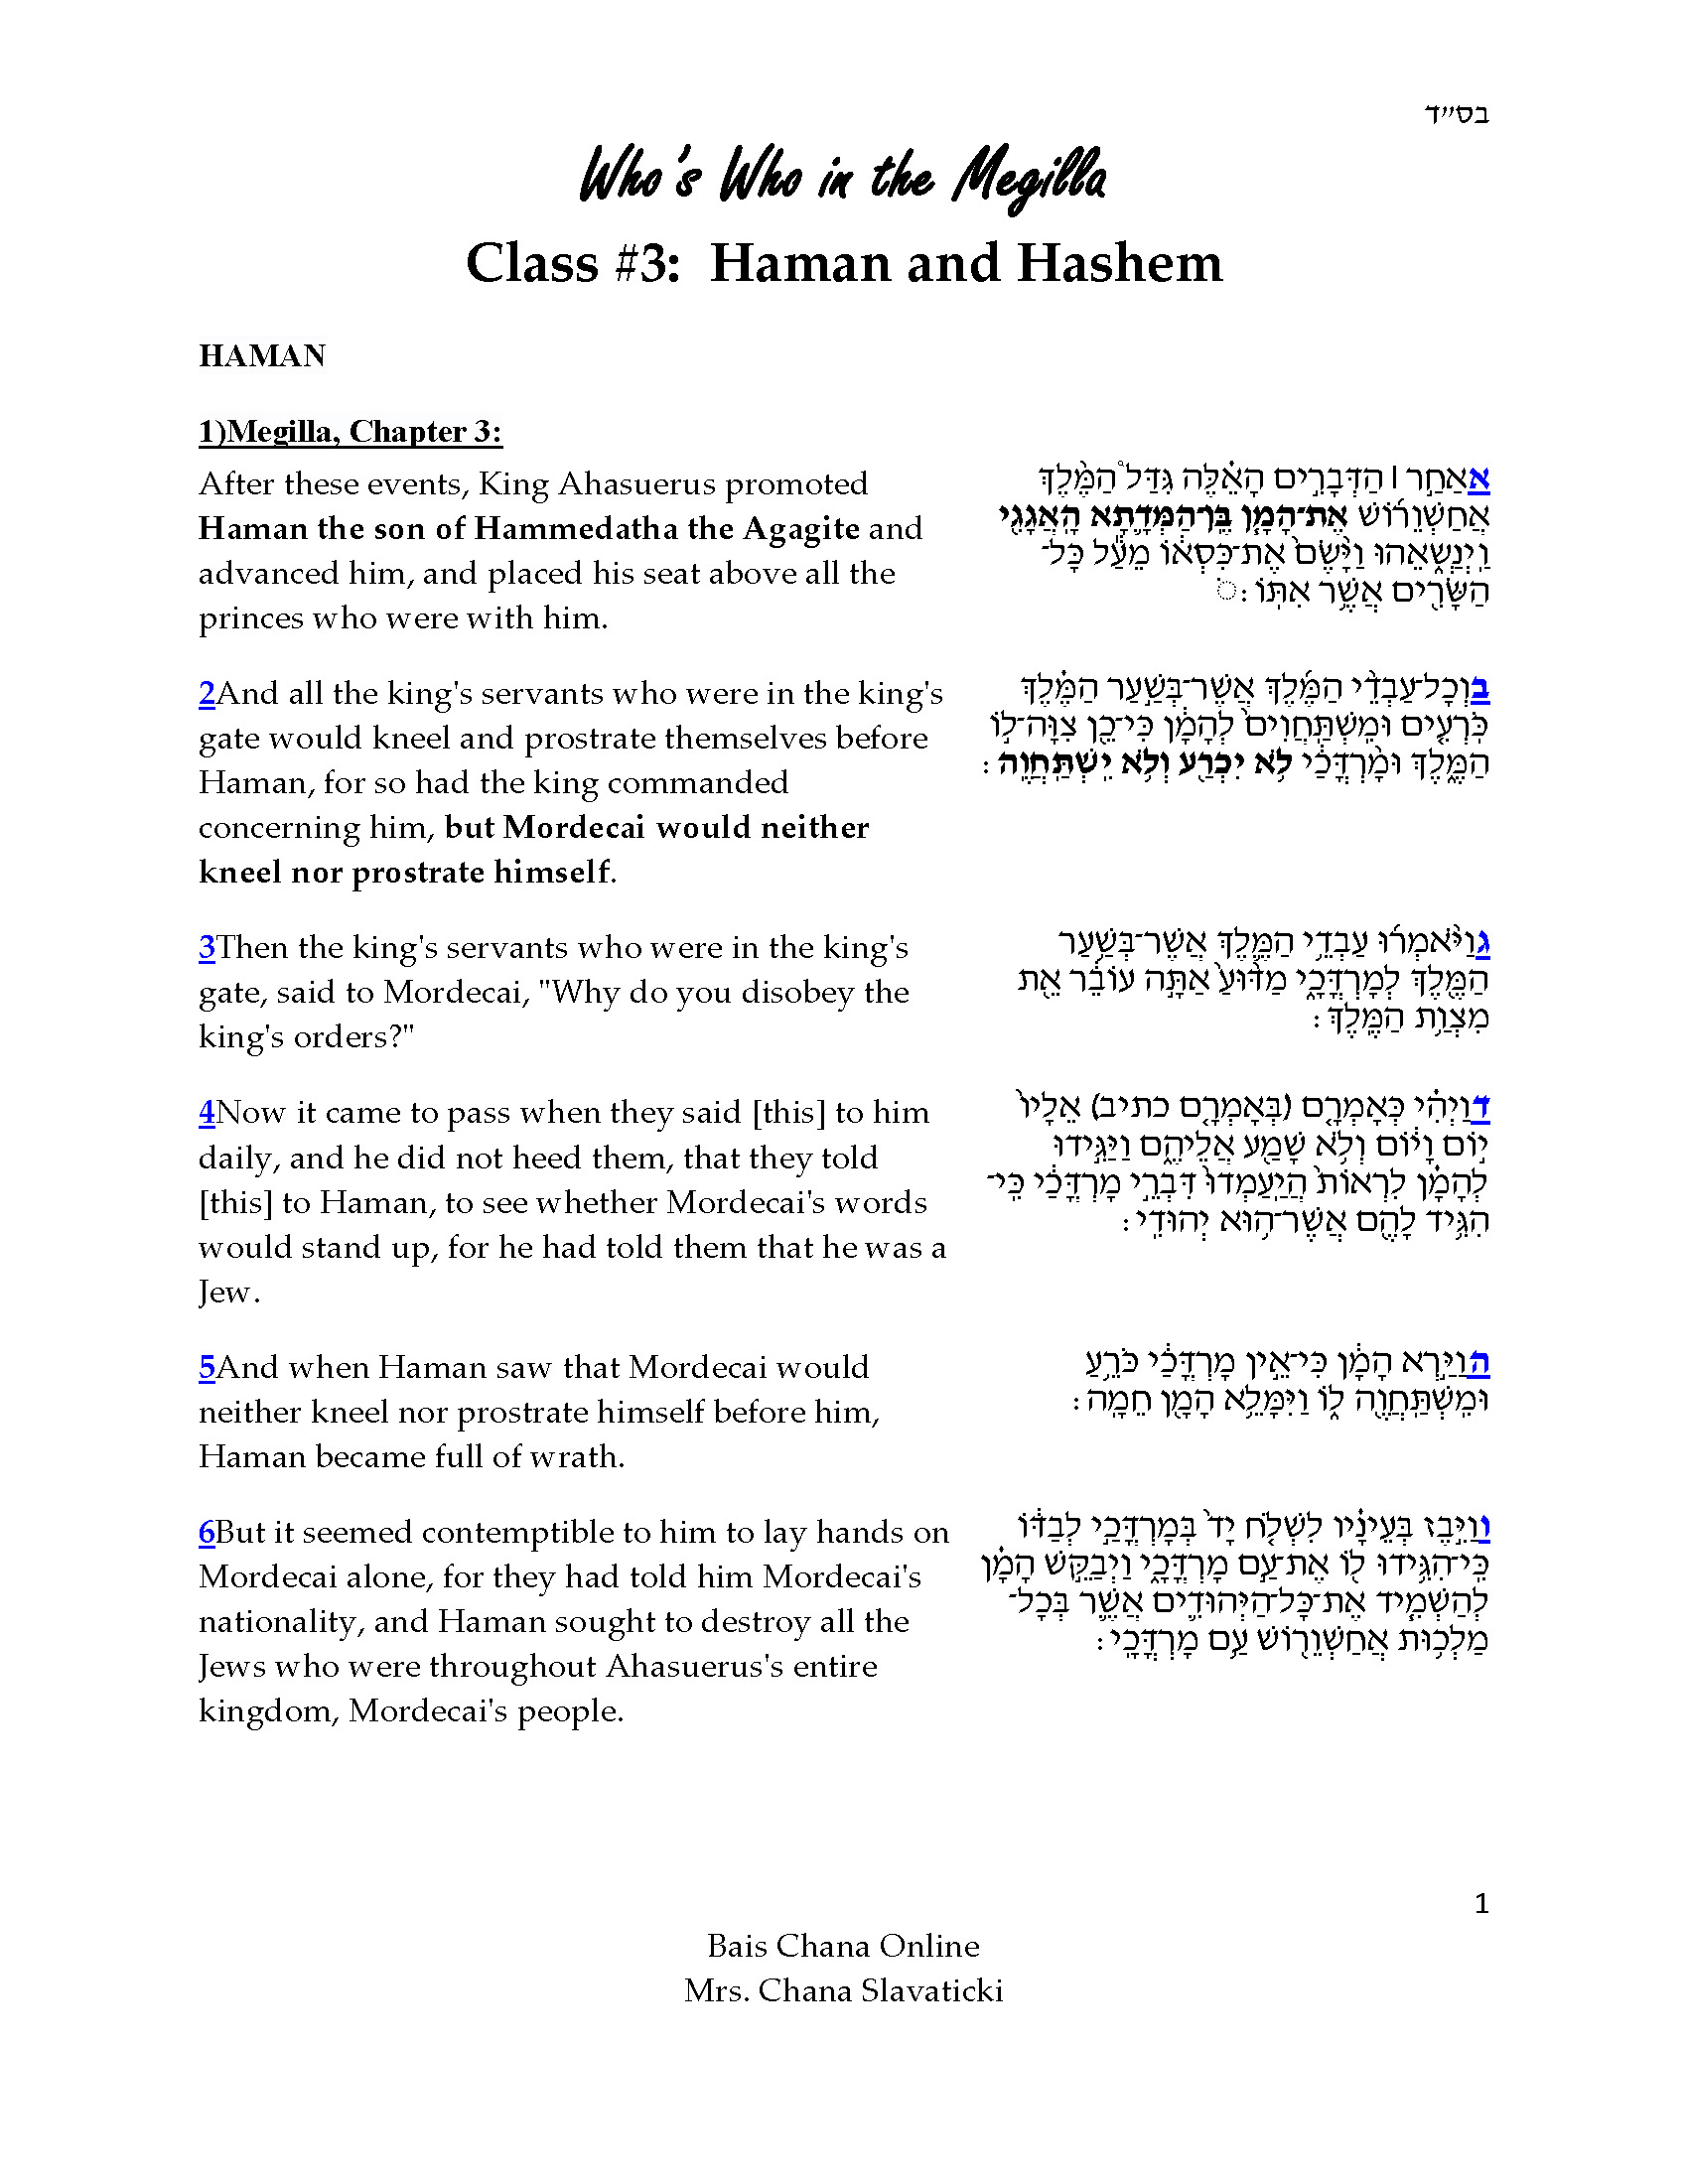 Who's Who in the Purim Story Class #3_Page_1